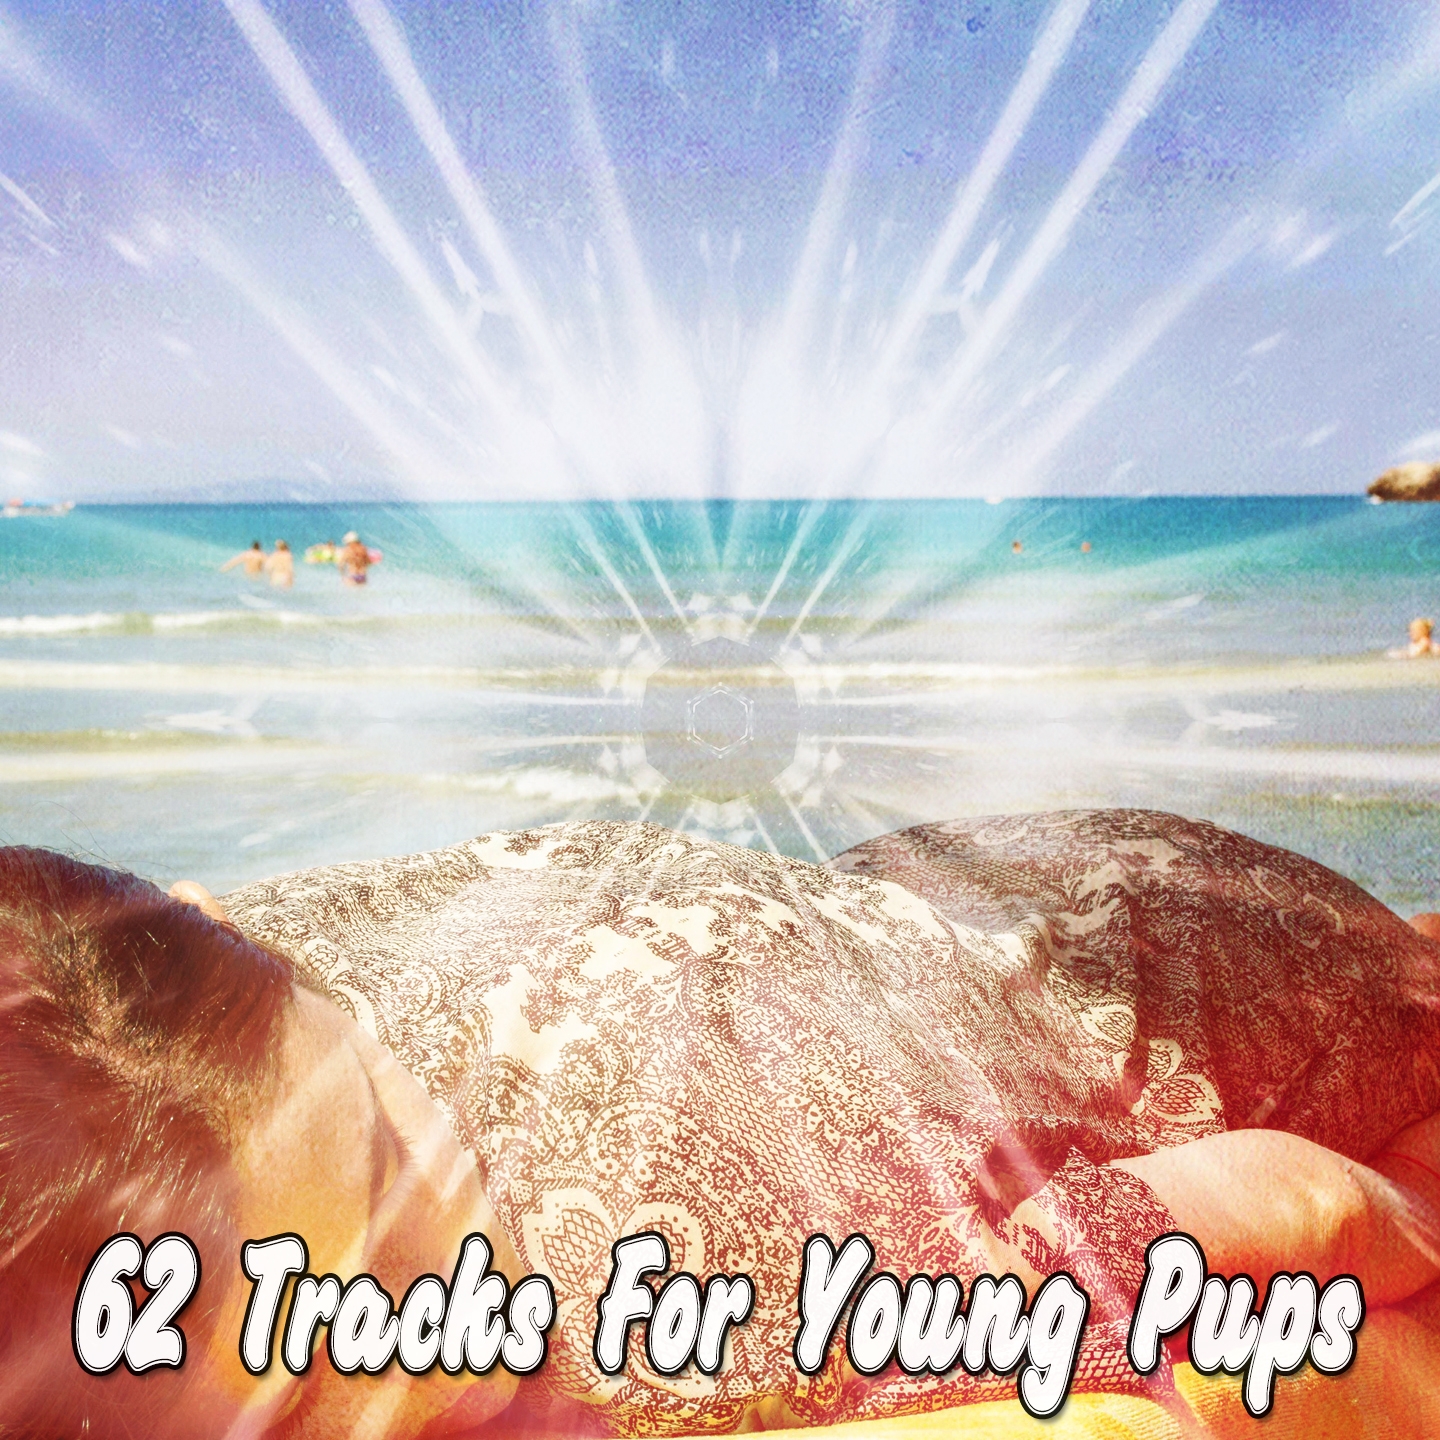 62 Tracks For Young Pups